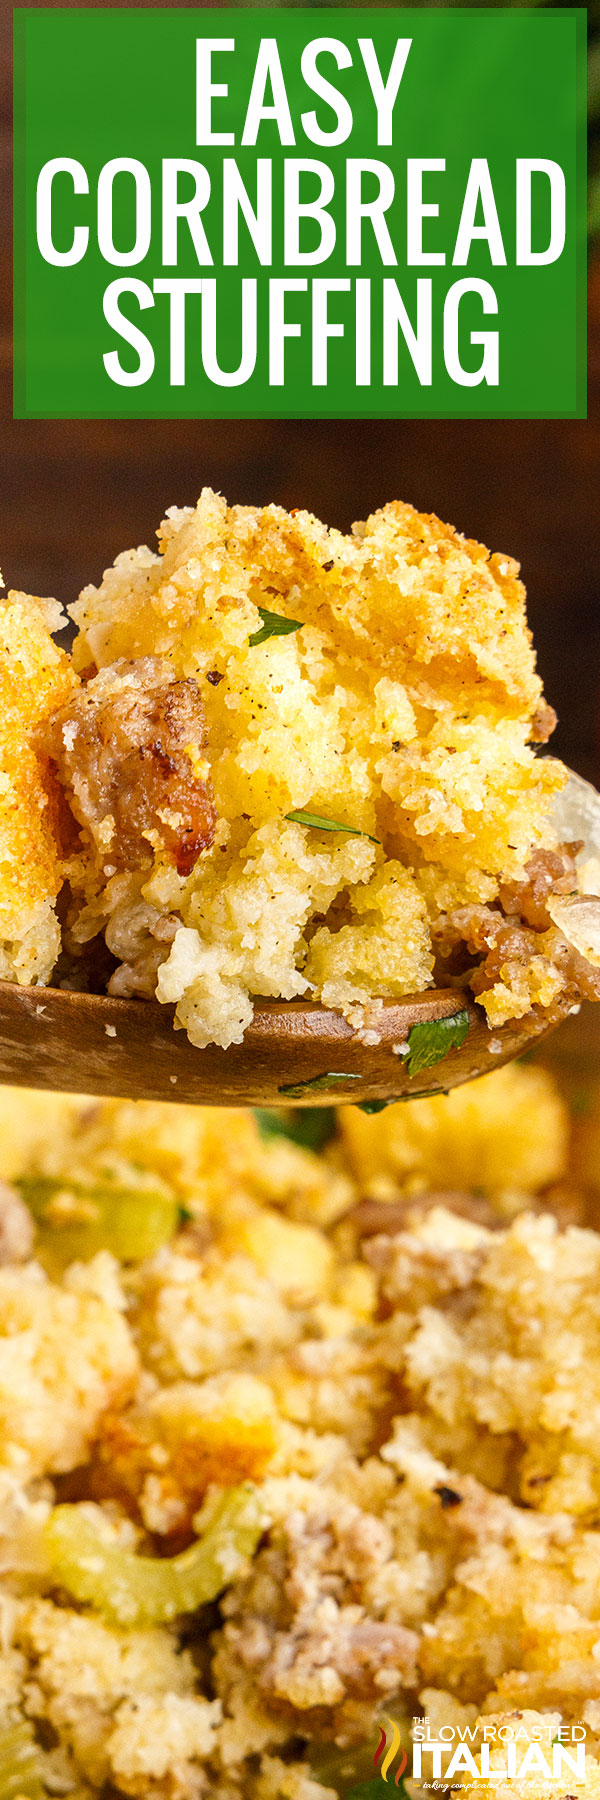 titled image (and shown): easy cornbread stuffing recipe